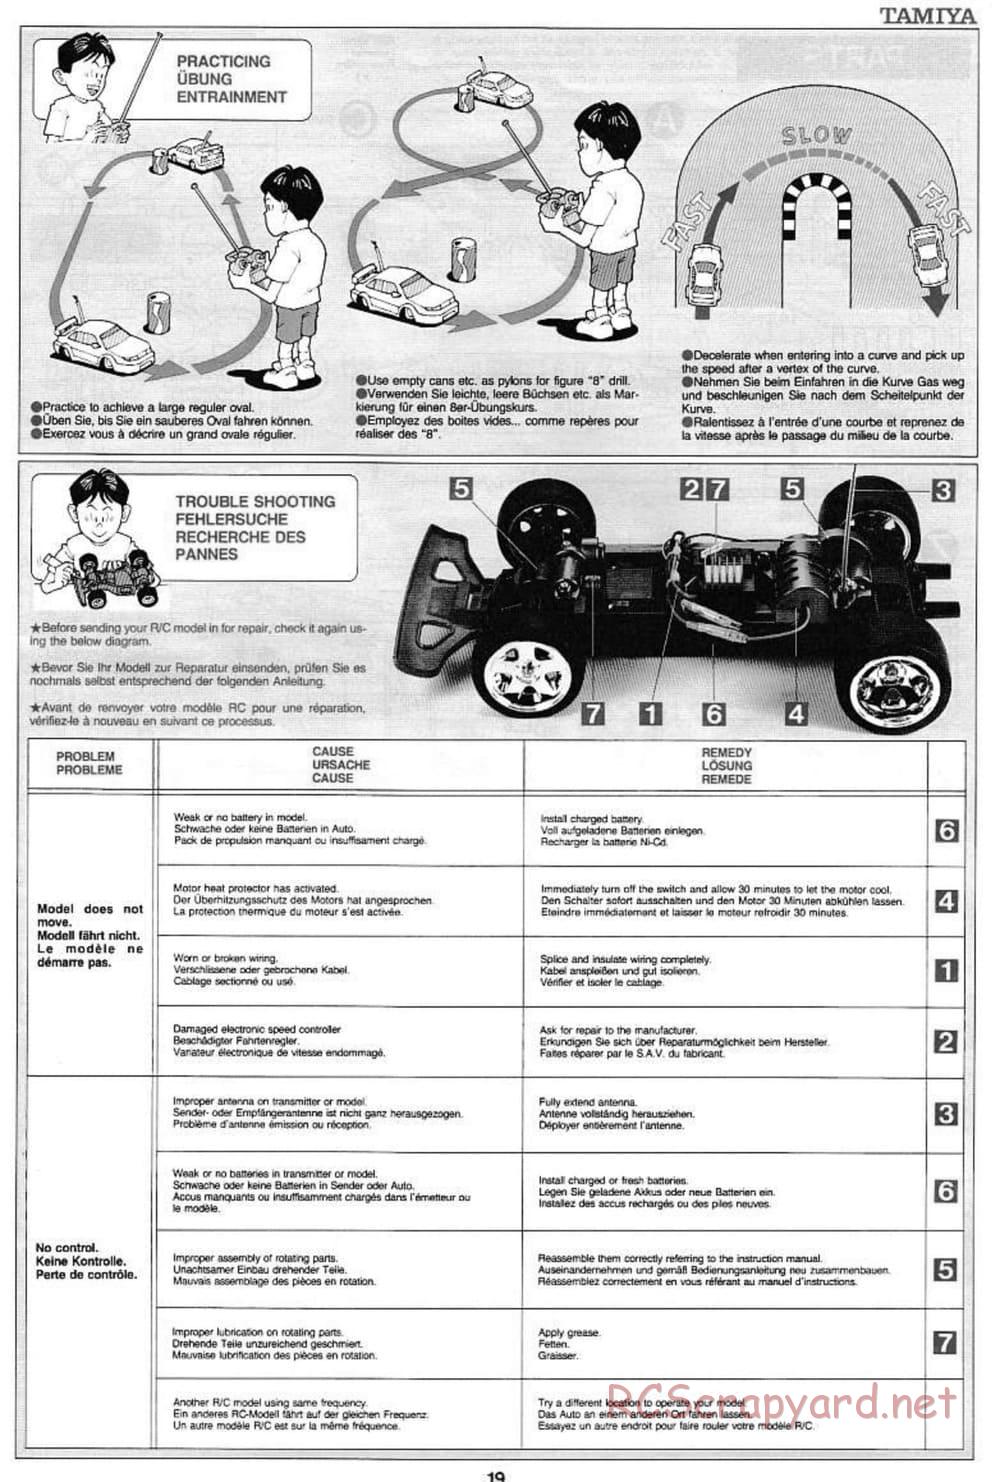 Tamiya - Voltec Fighter - Boy's 4WD Chassis - Manual - Page 19